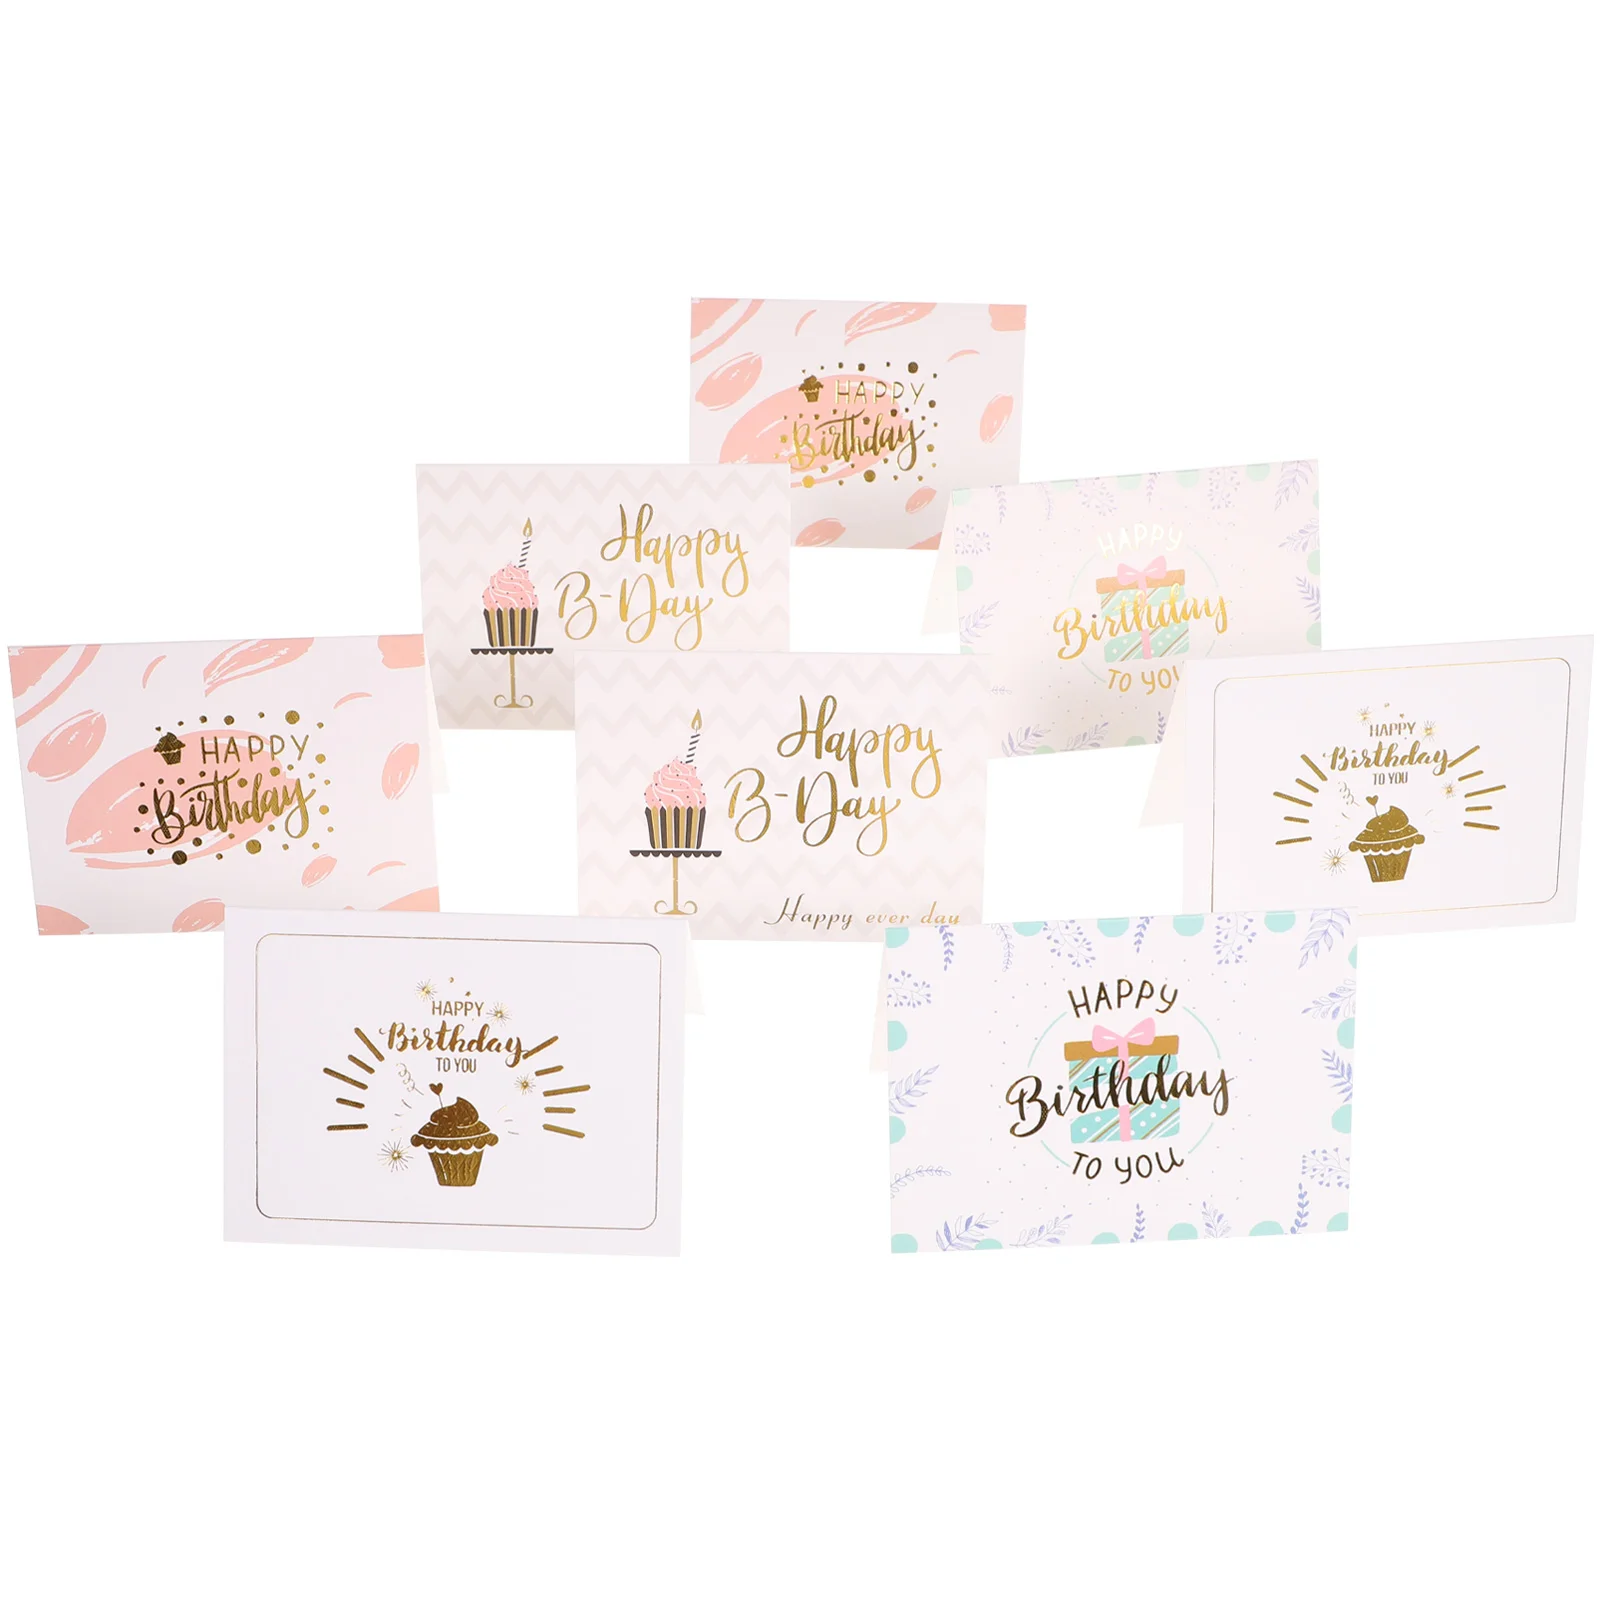 40 Pcs Birthday Card Writing Cards Gift Halloween for Greeting Happy Party Blessing Elegant Message Men and Women